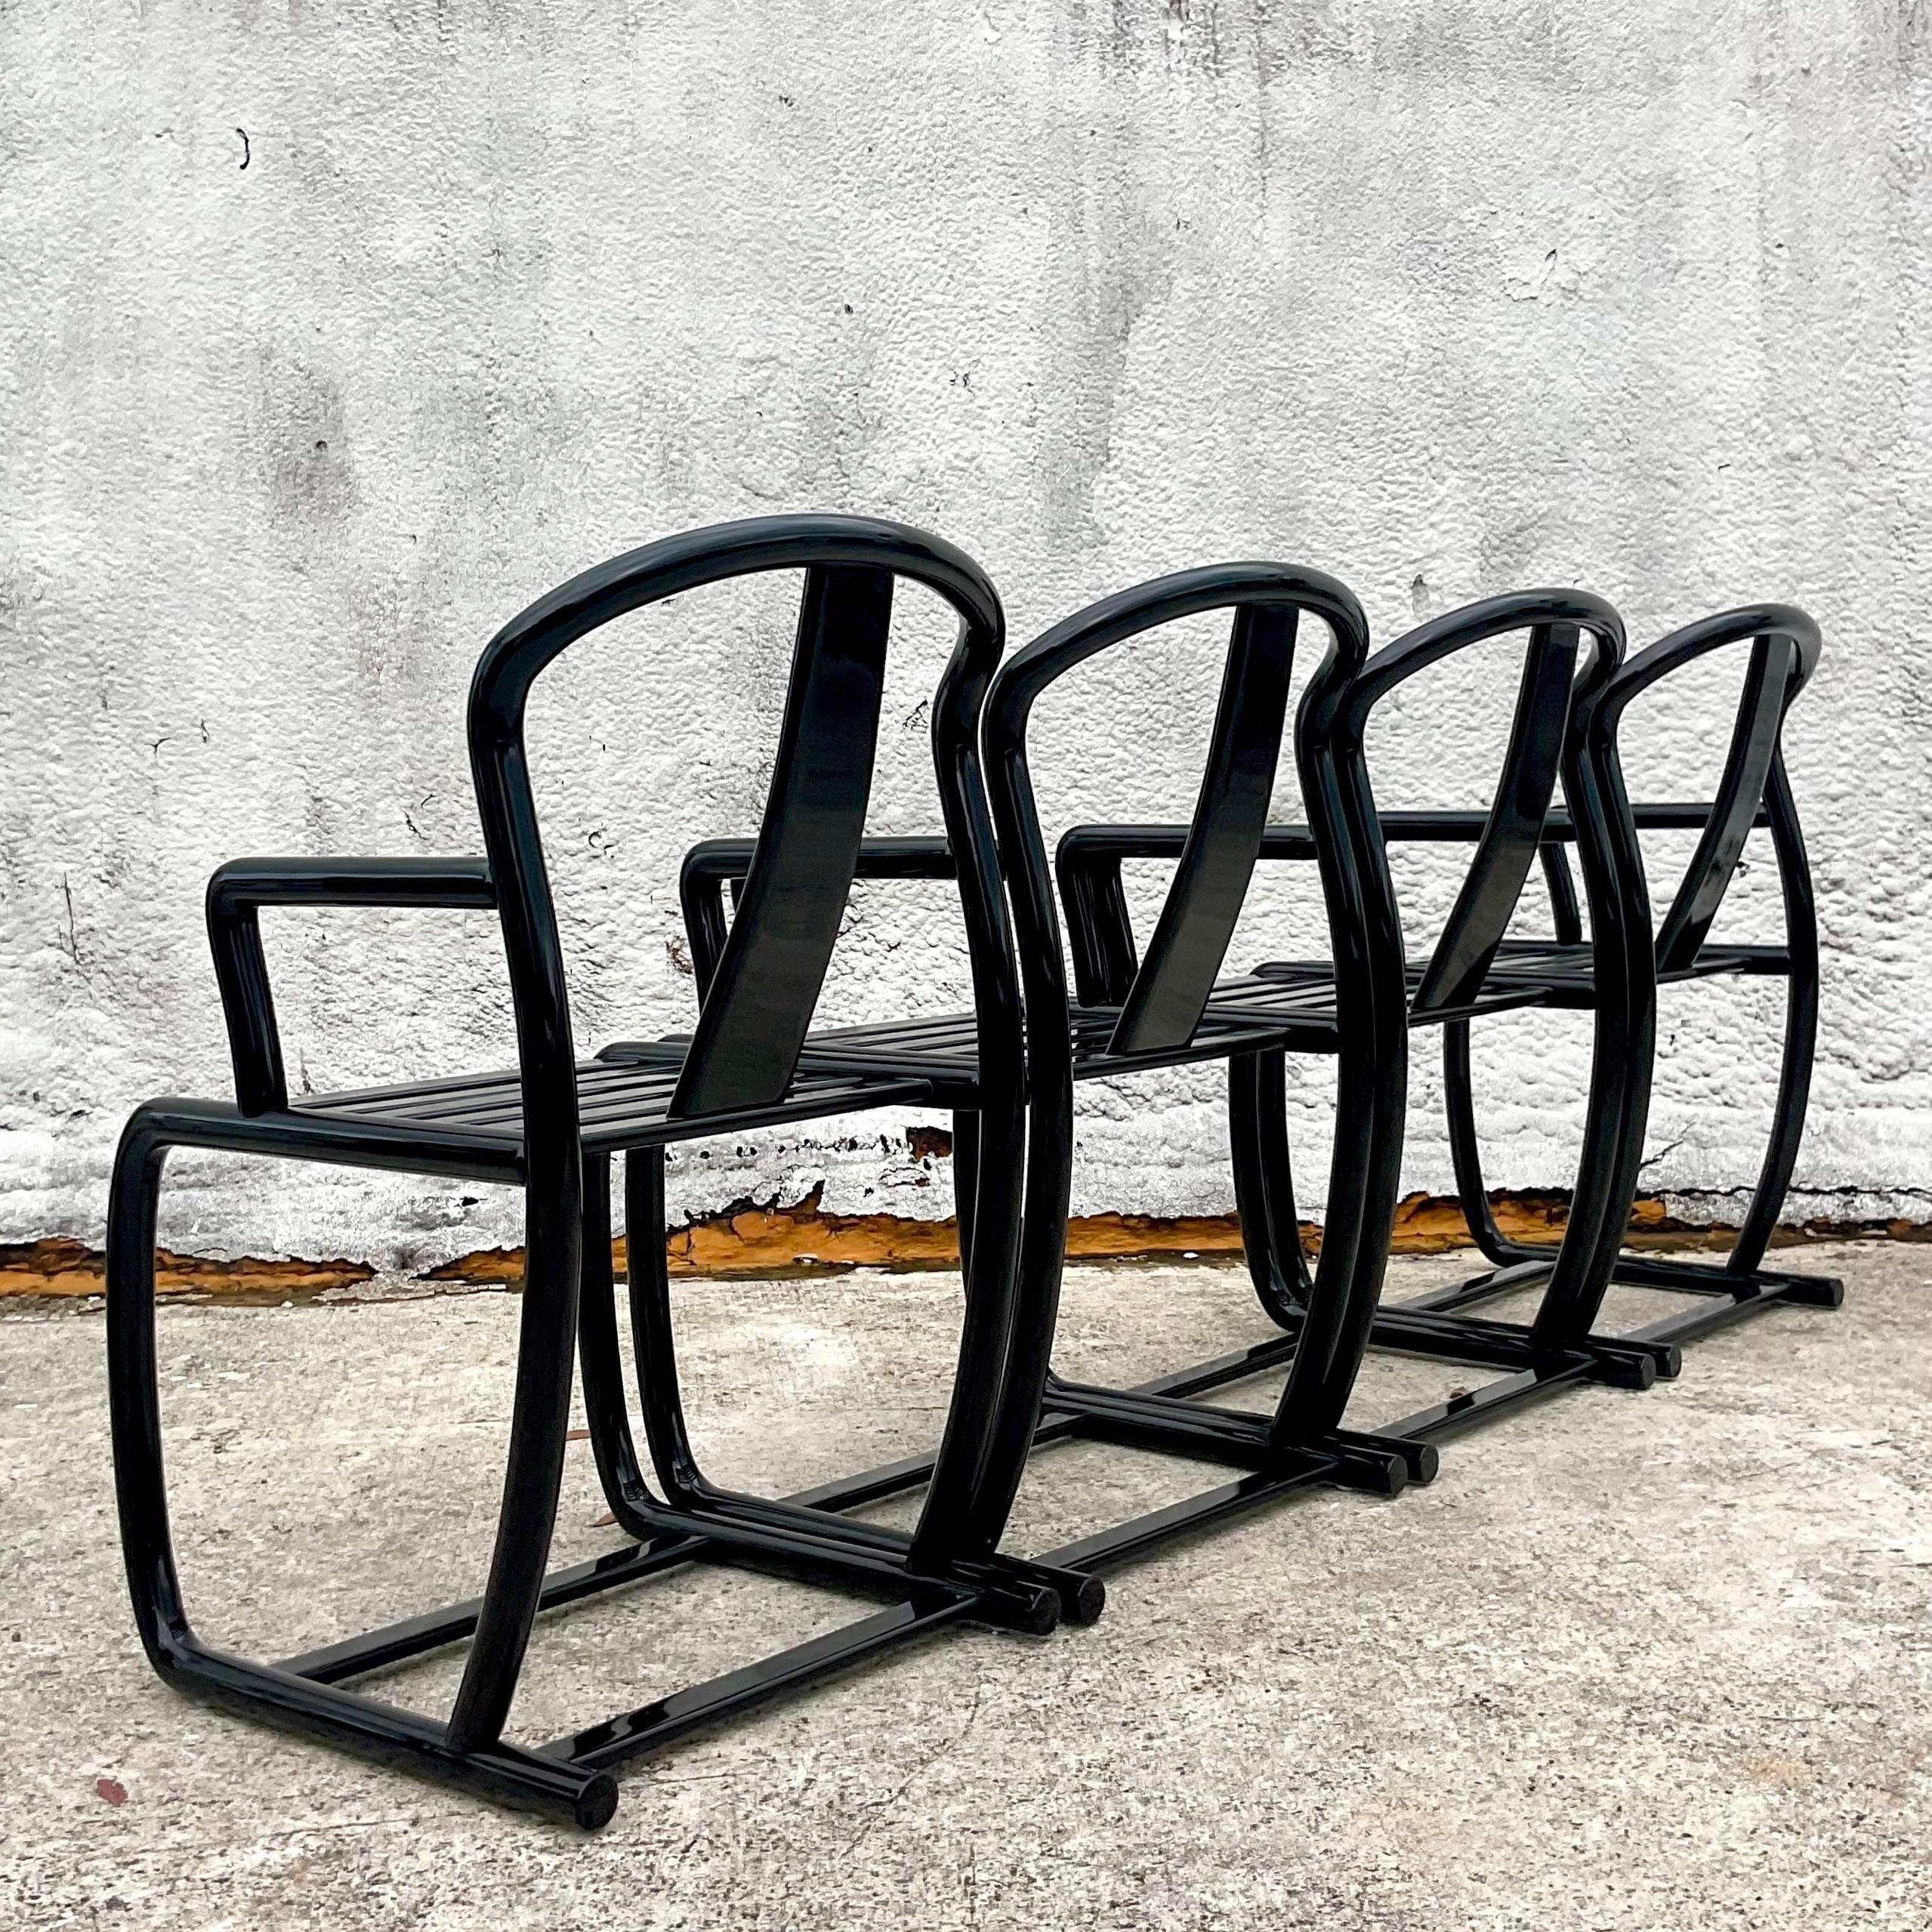 A fantastic set of 4 vintage Postmodern chairs. A chic gloss black lacquer in a beautiful contemporary shape. Made in Italy and marked on the bottom. Acquired from a Palm Beach estate.